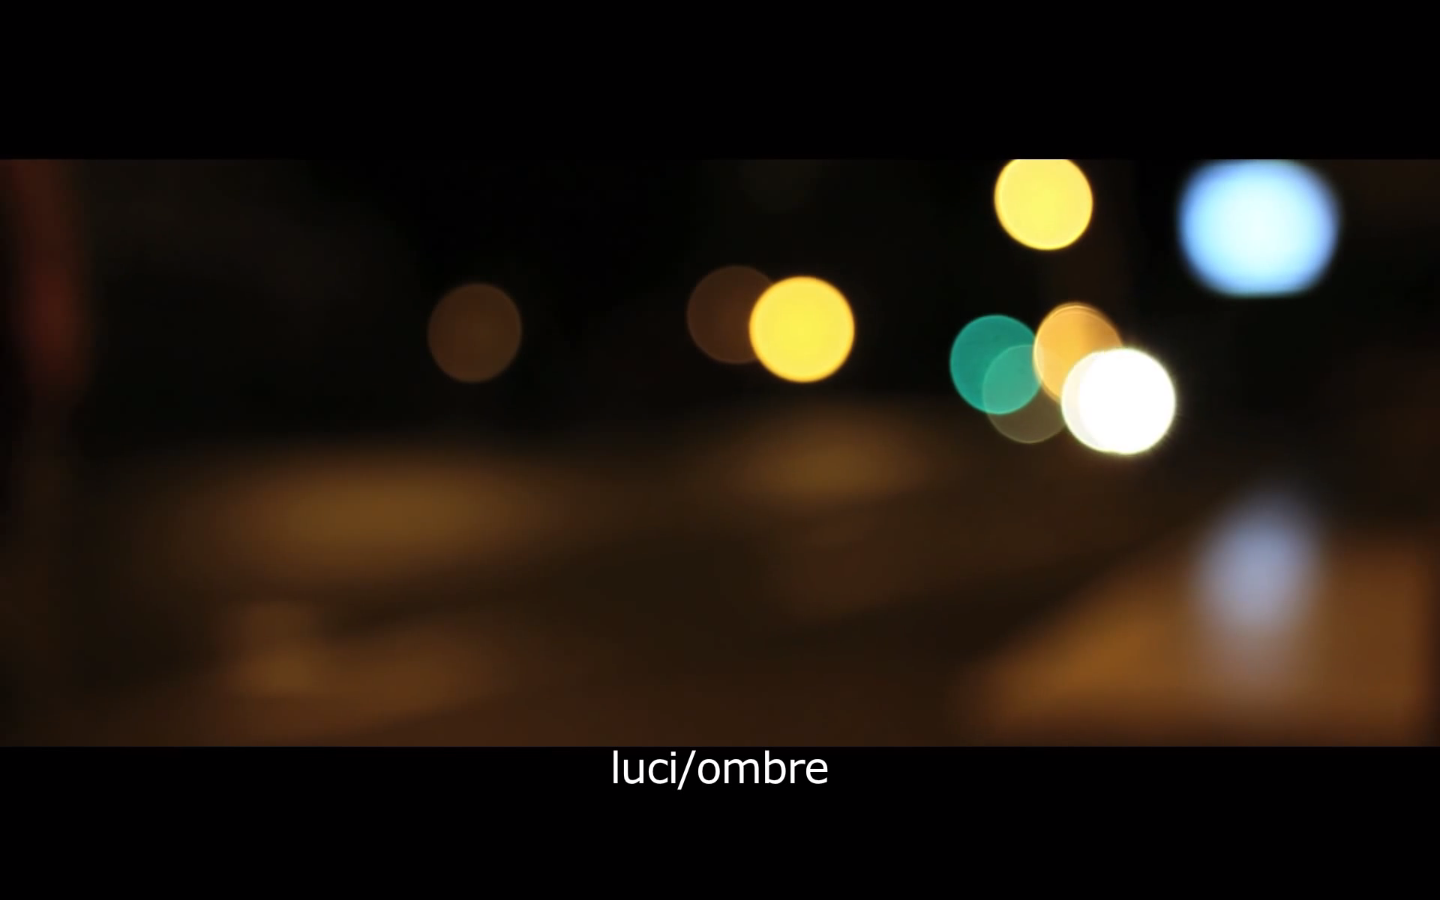 luci/ombre